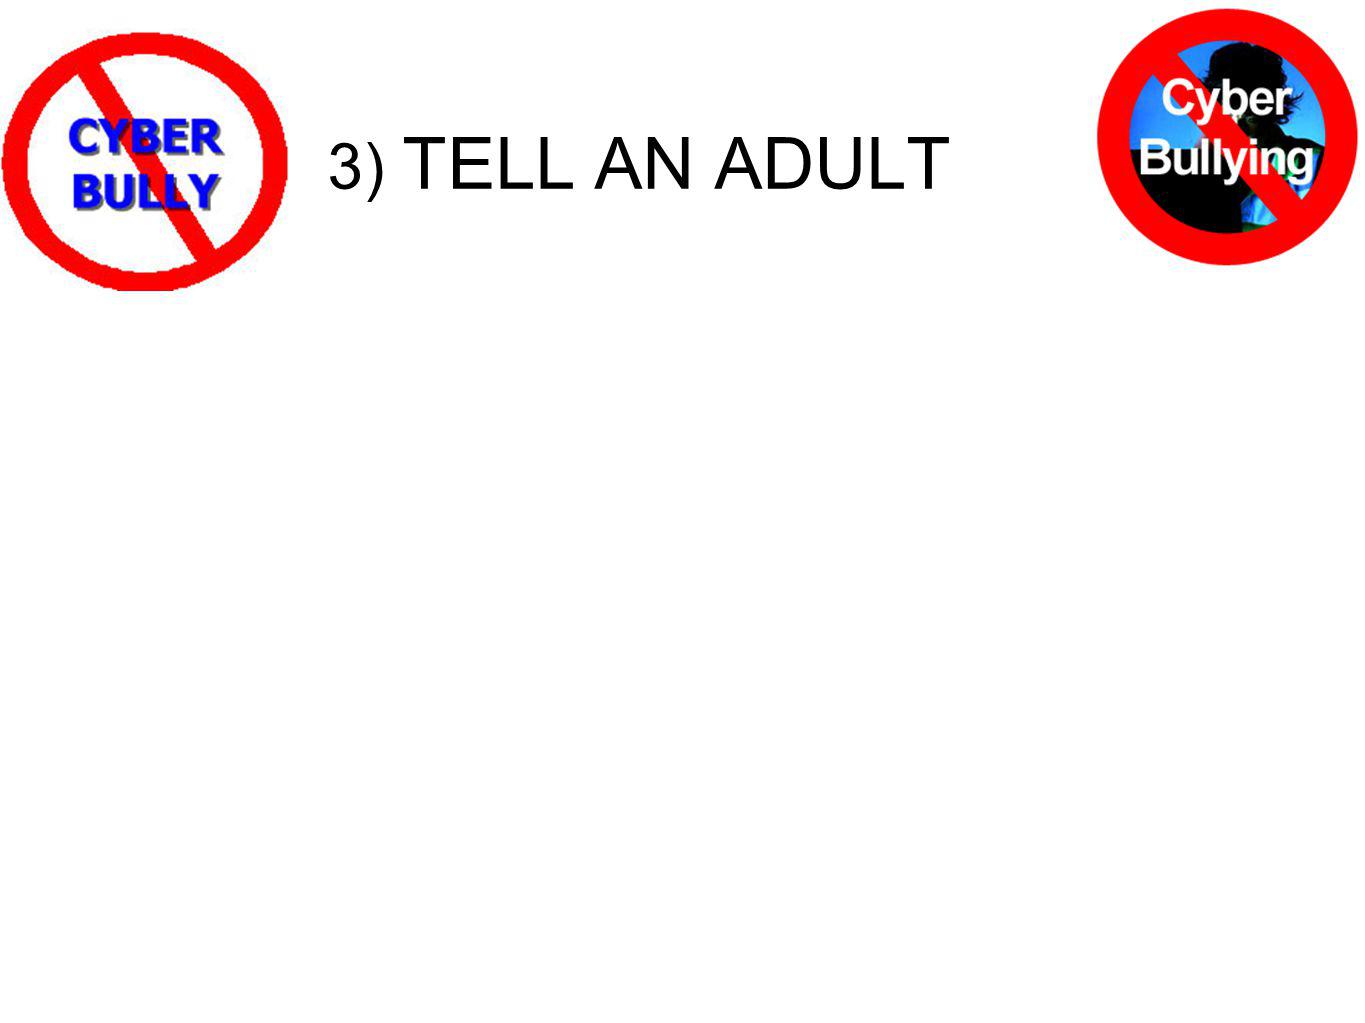 3) TELL AN ADULT